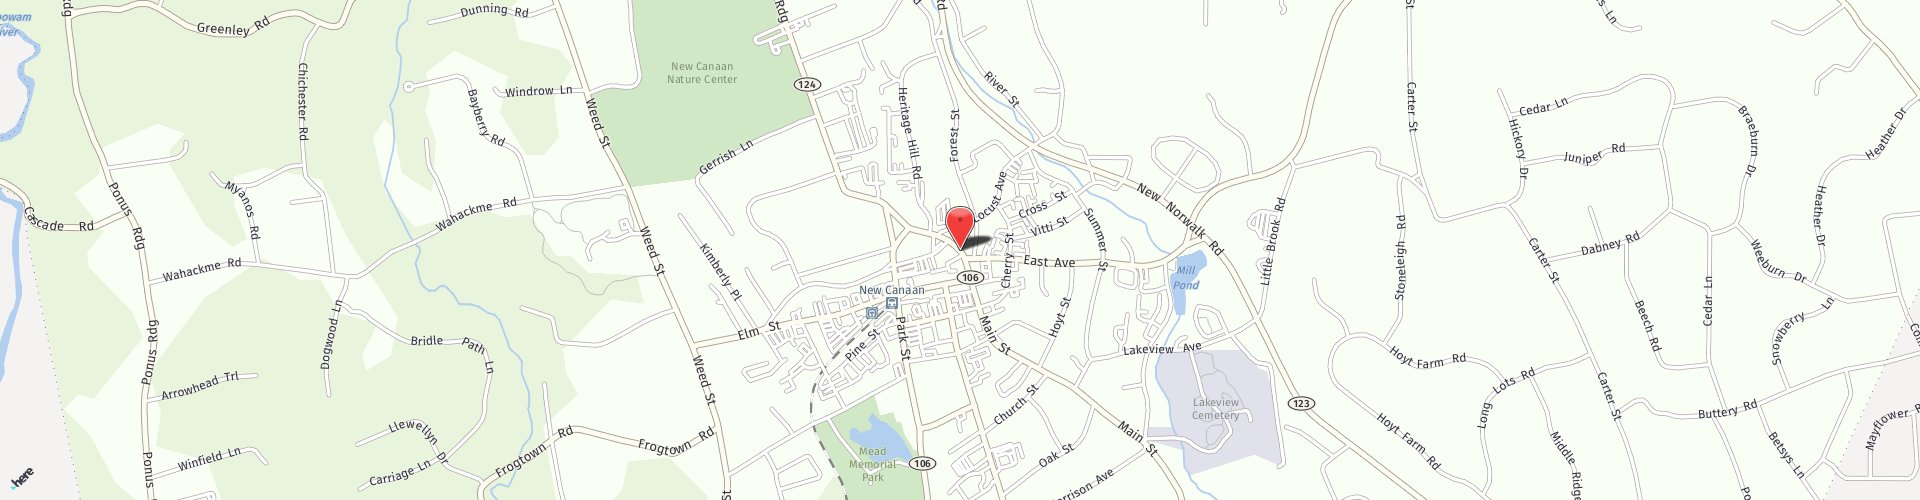 Location Map: 80 Main St. New Canaan, CT 06840